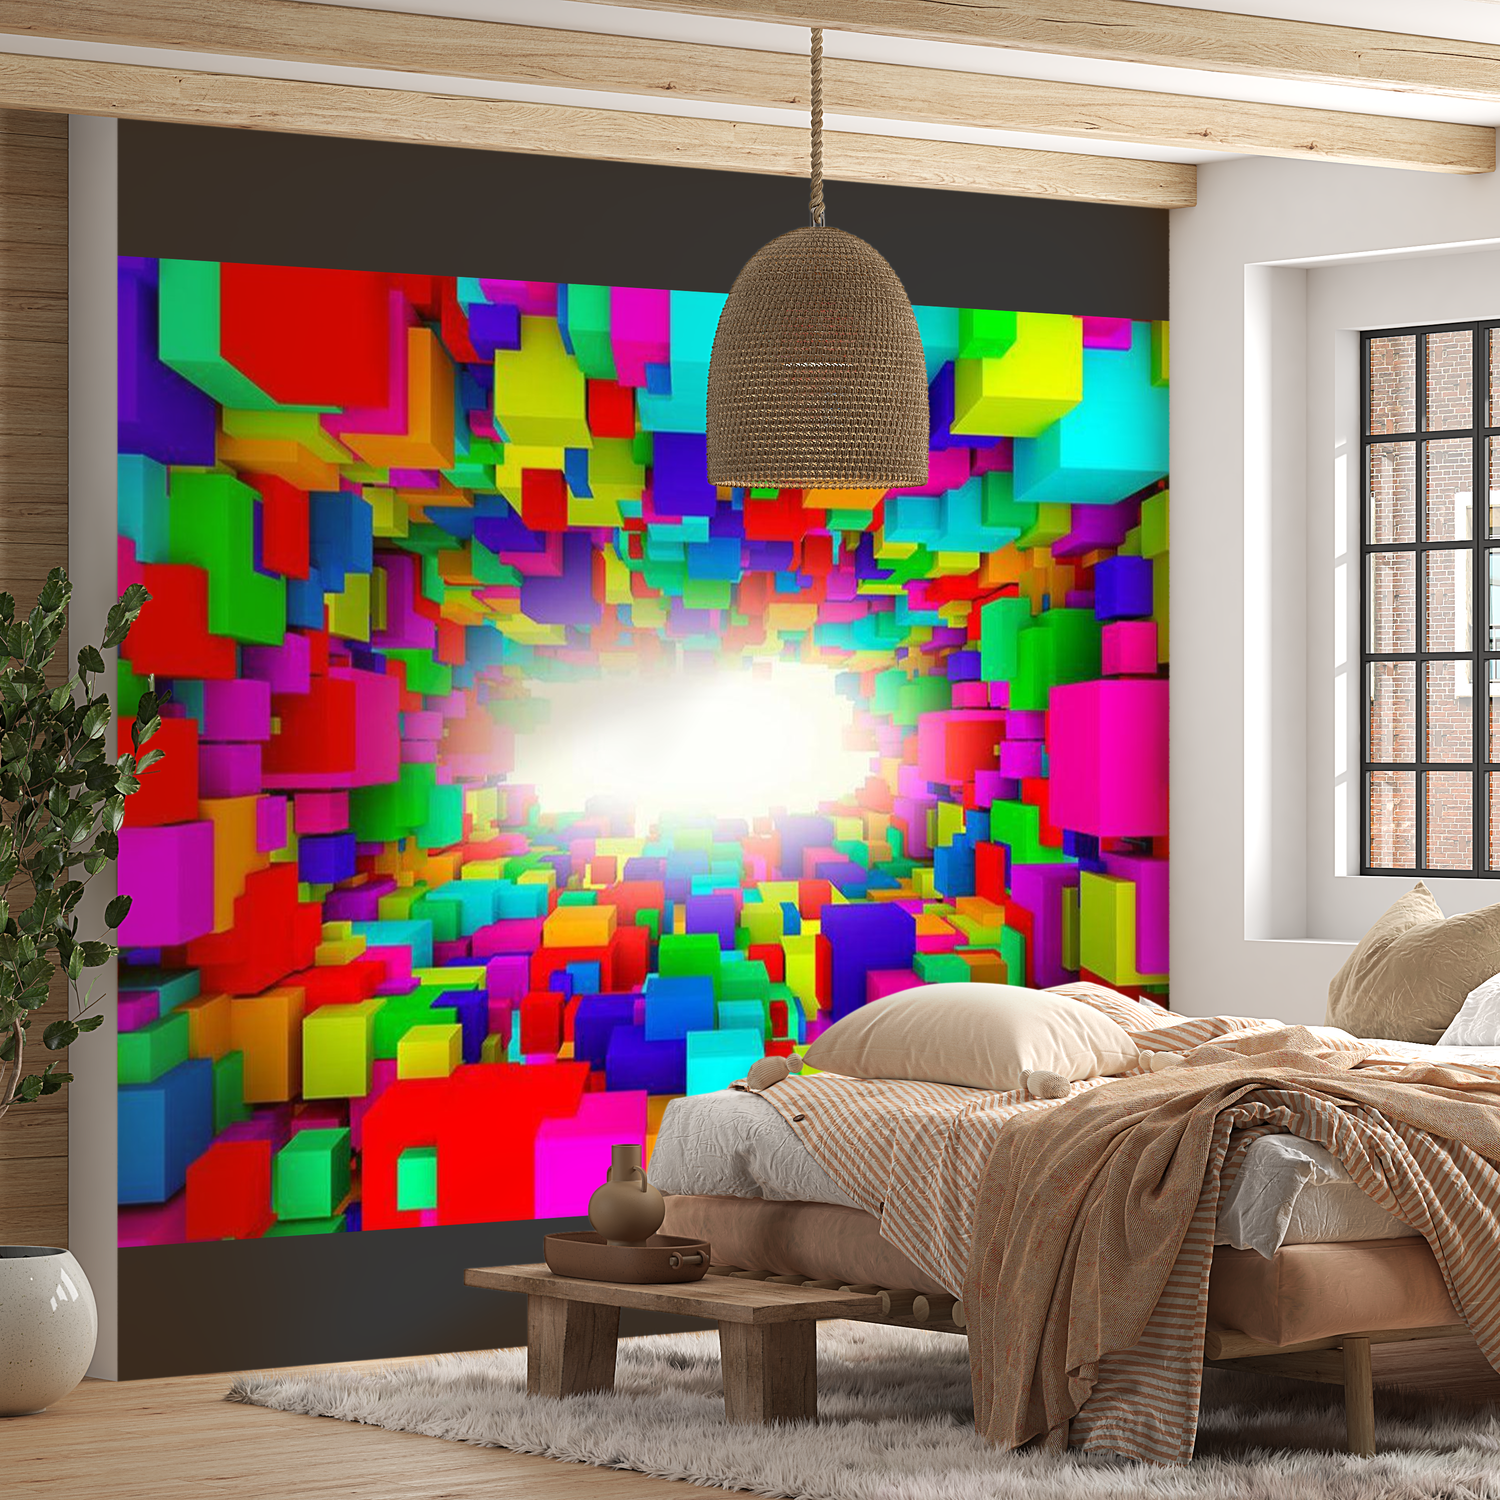 3D Illusion Wallpaper Wall Mural - Light In Color Geometry 39"Wx27"H